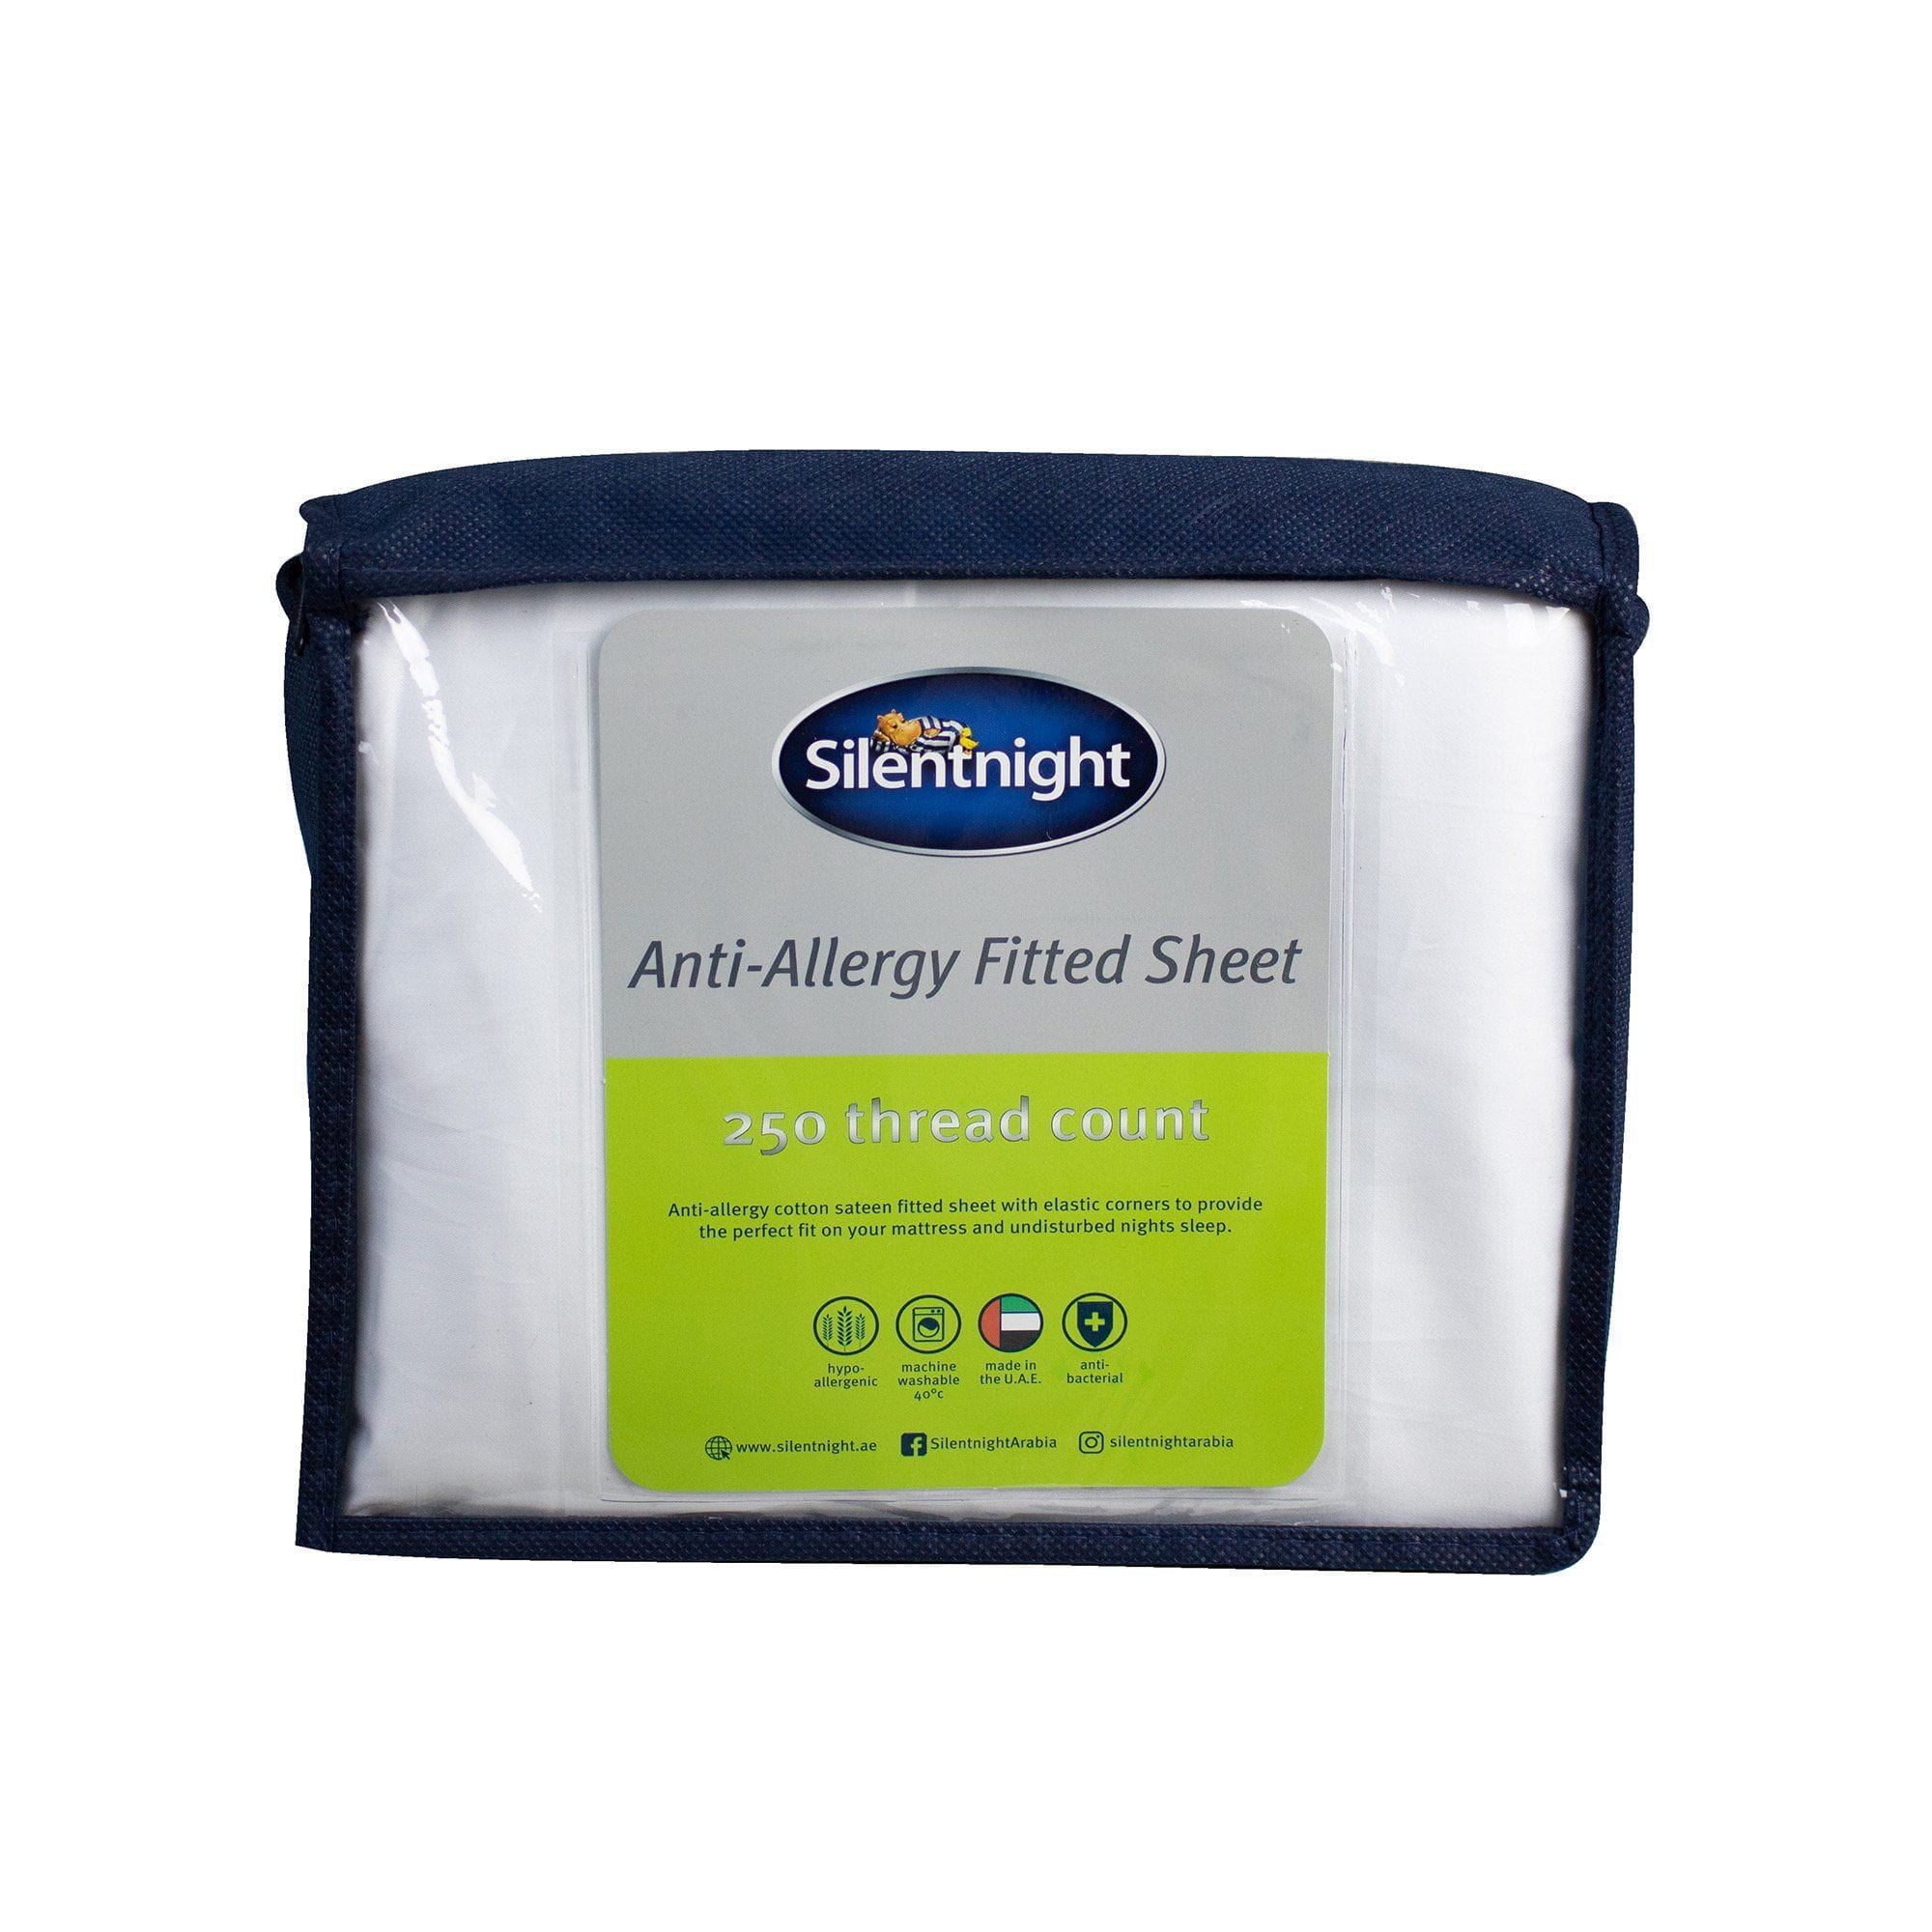 Anti-Allergy Fitted Sheet